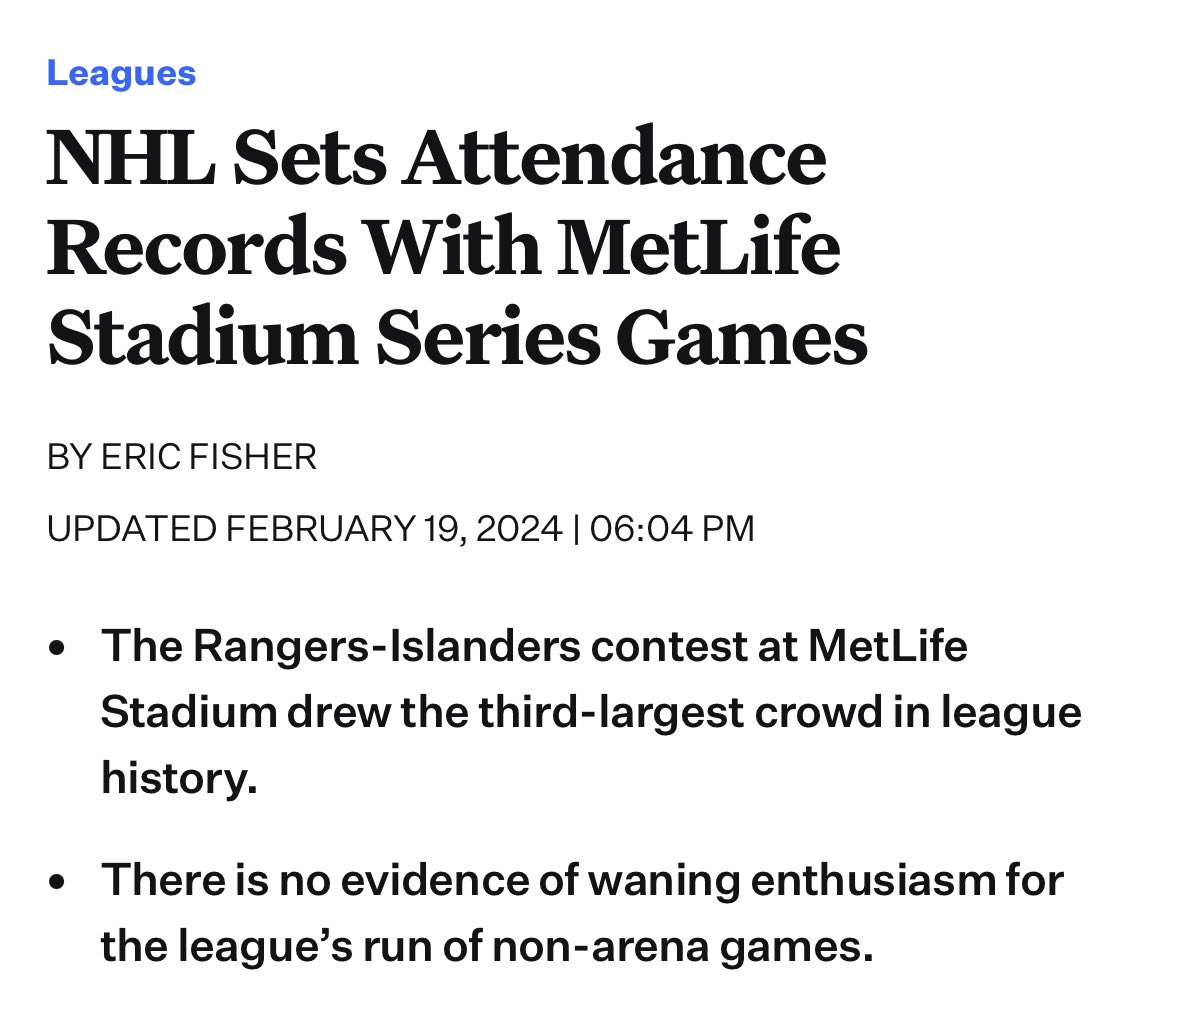 It’s interesting that we keep seeing record attendance for live events of various kinds (I hear Taylor Swift did a popular tour) despite the bad economy.